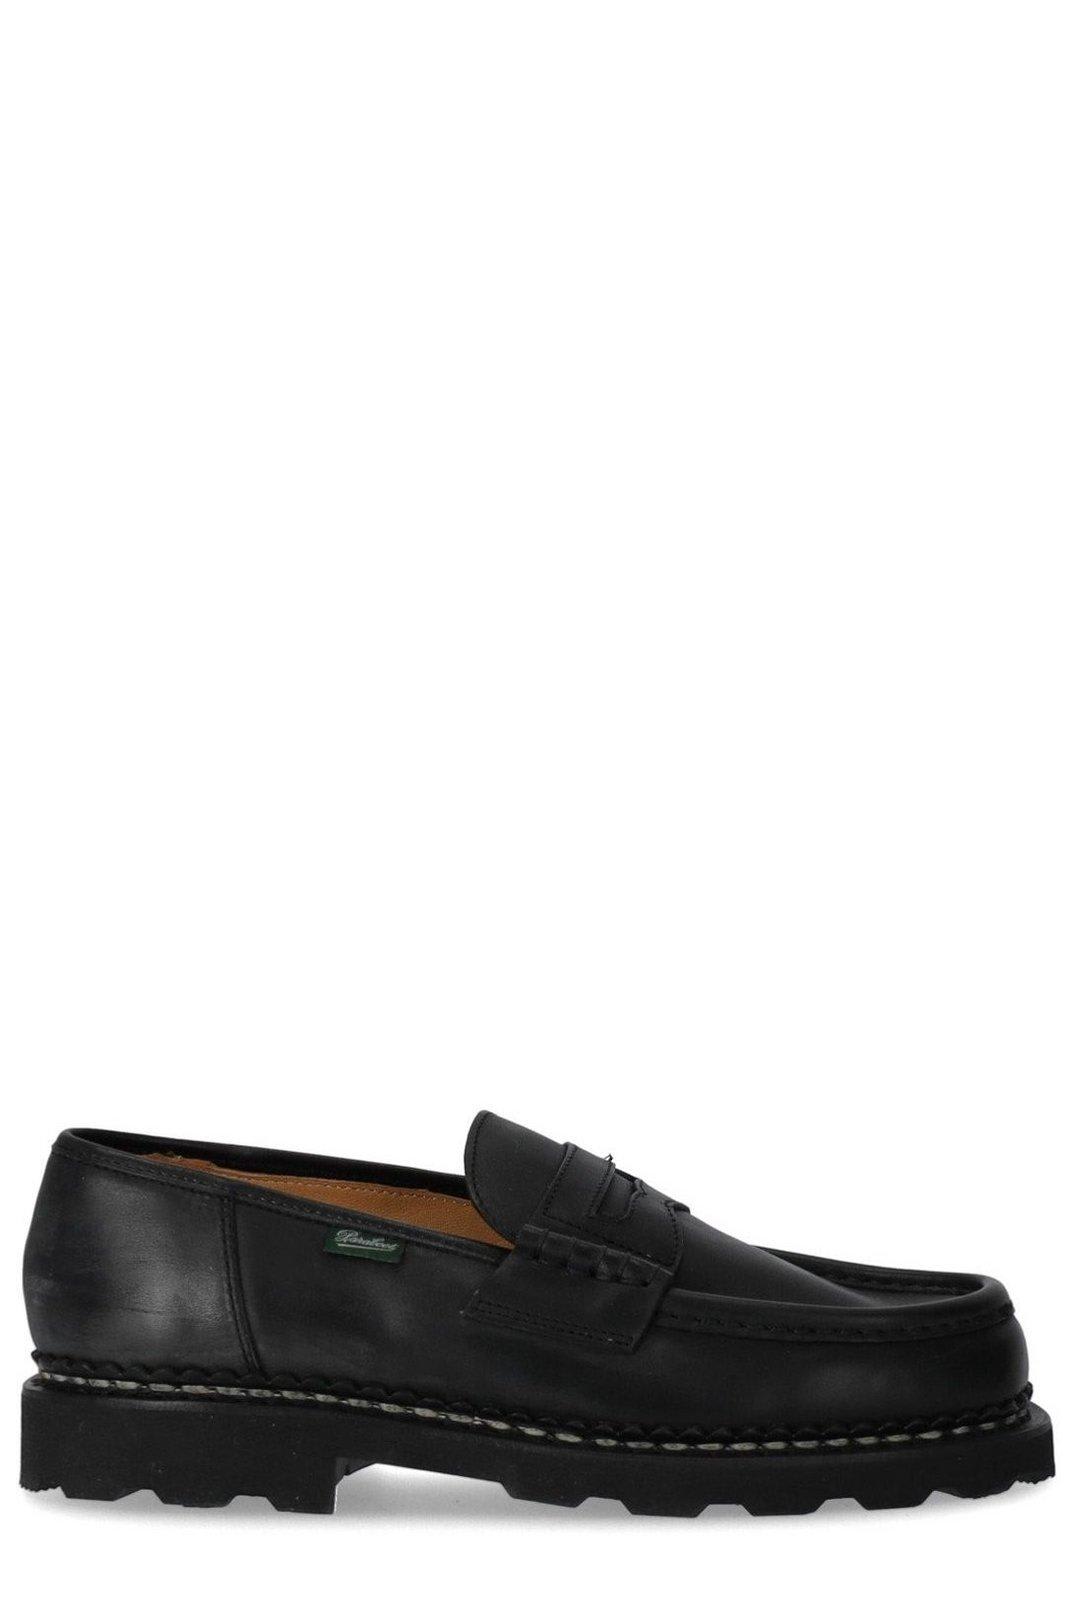 Reims Marche Slip-on Loafers